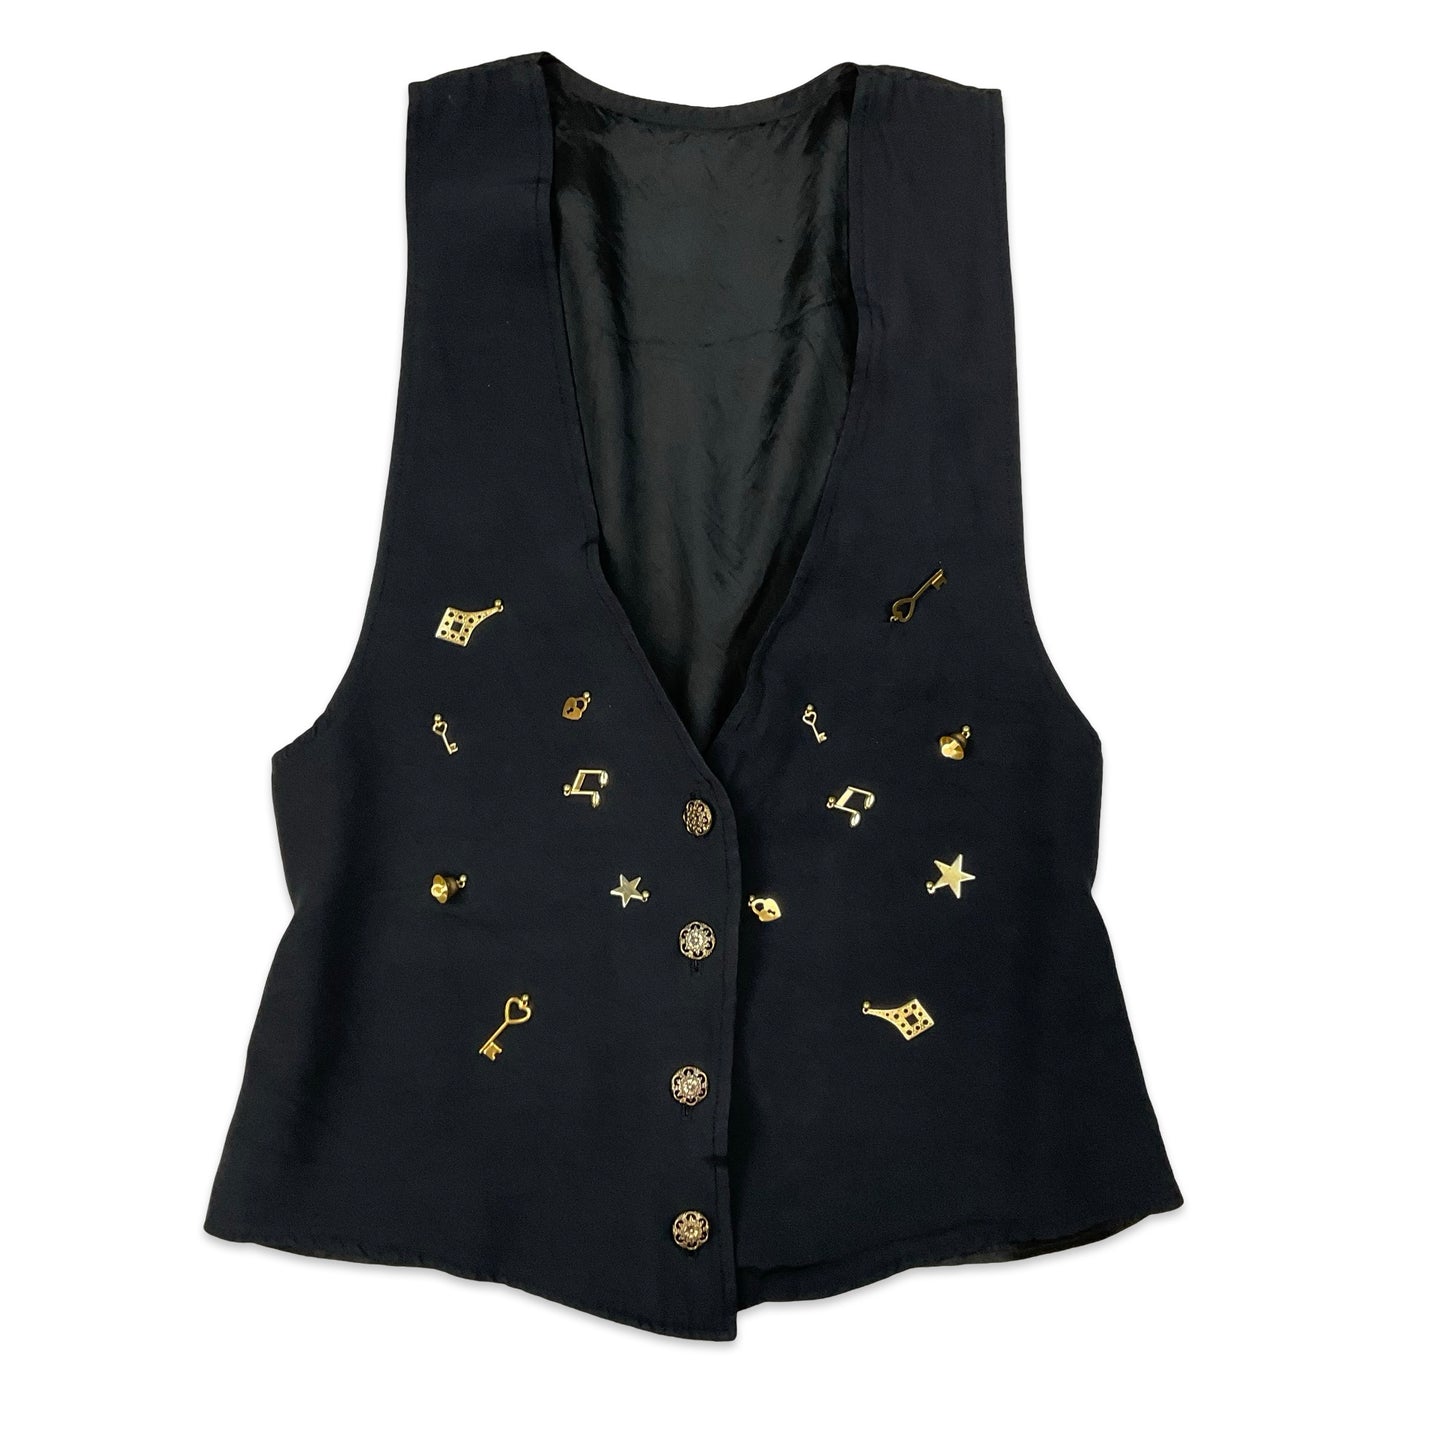 Vintage Black Waistcoat with Brass Adornments 14